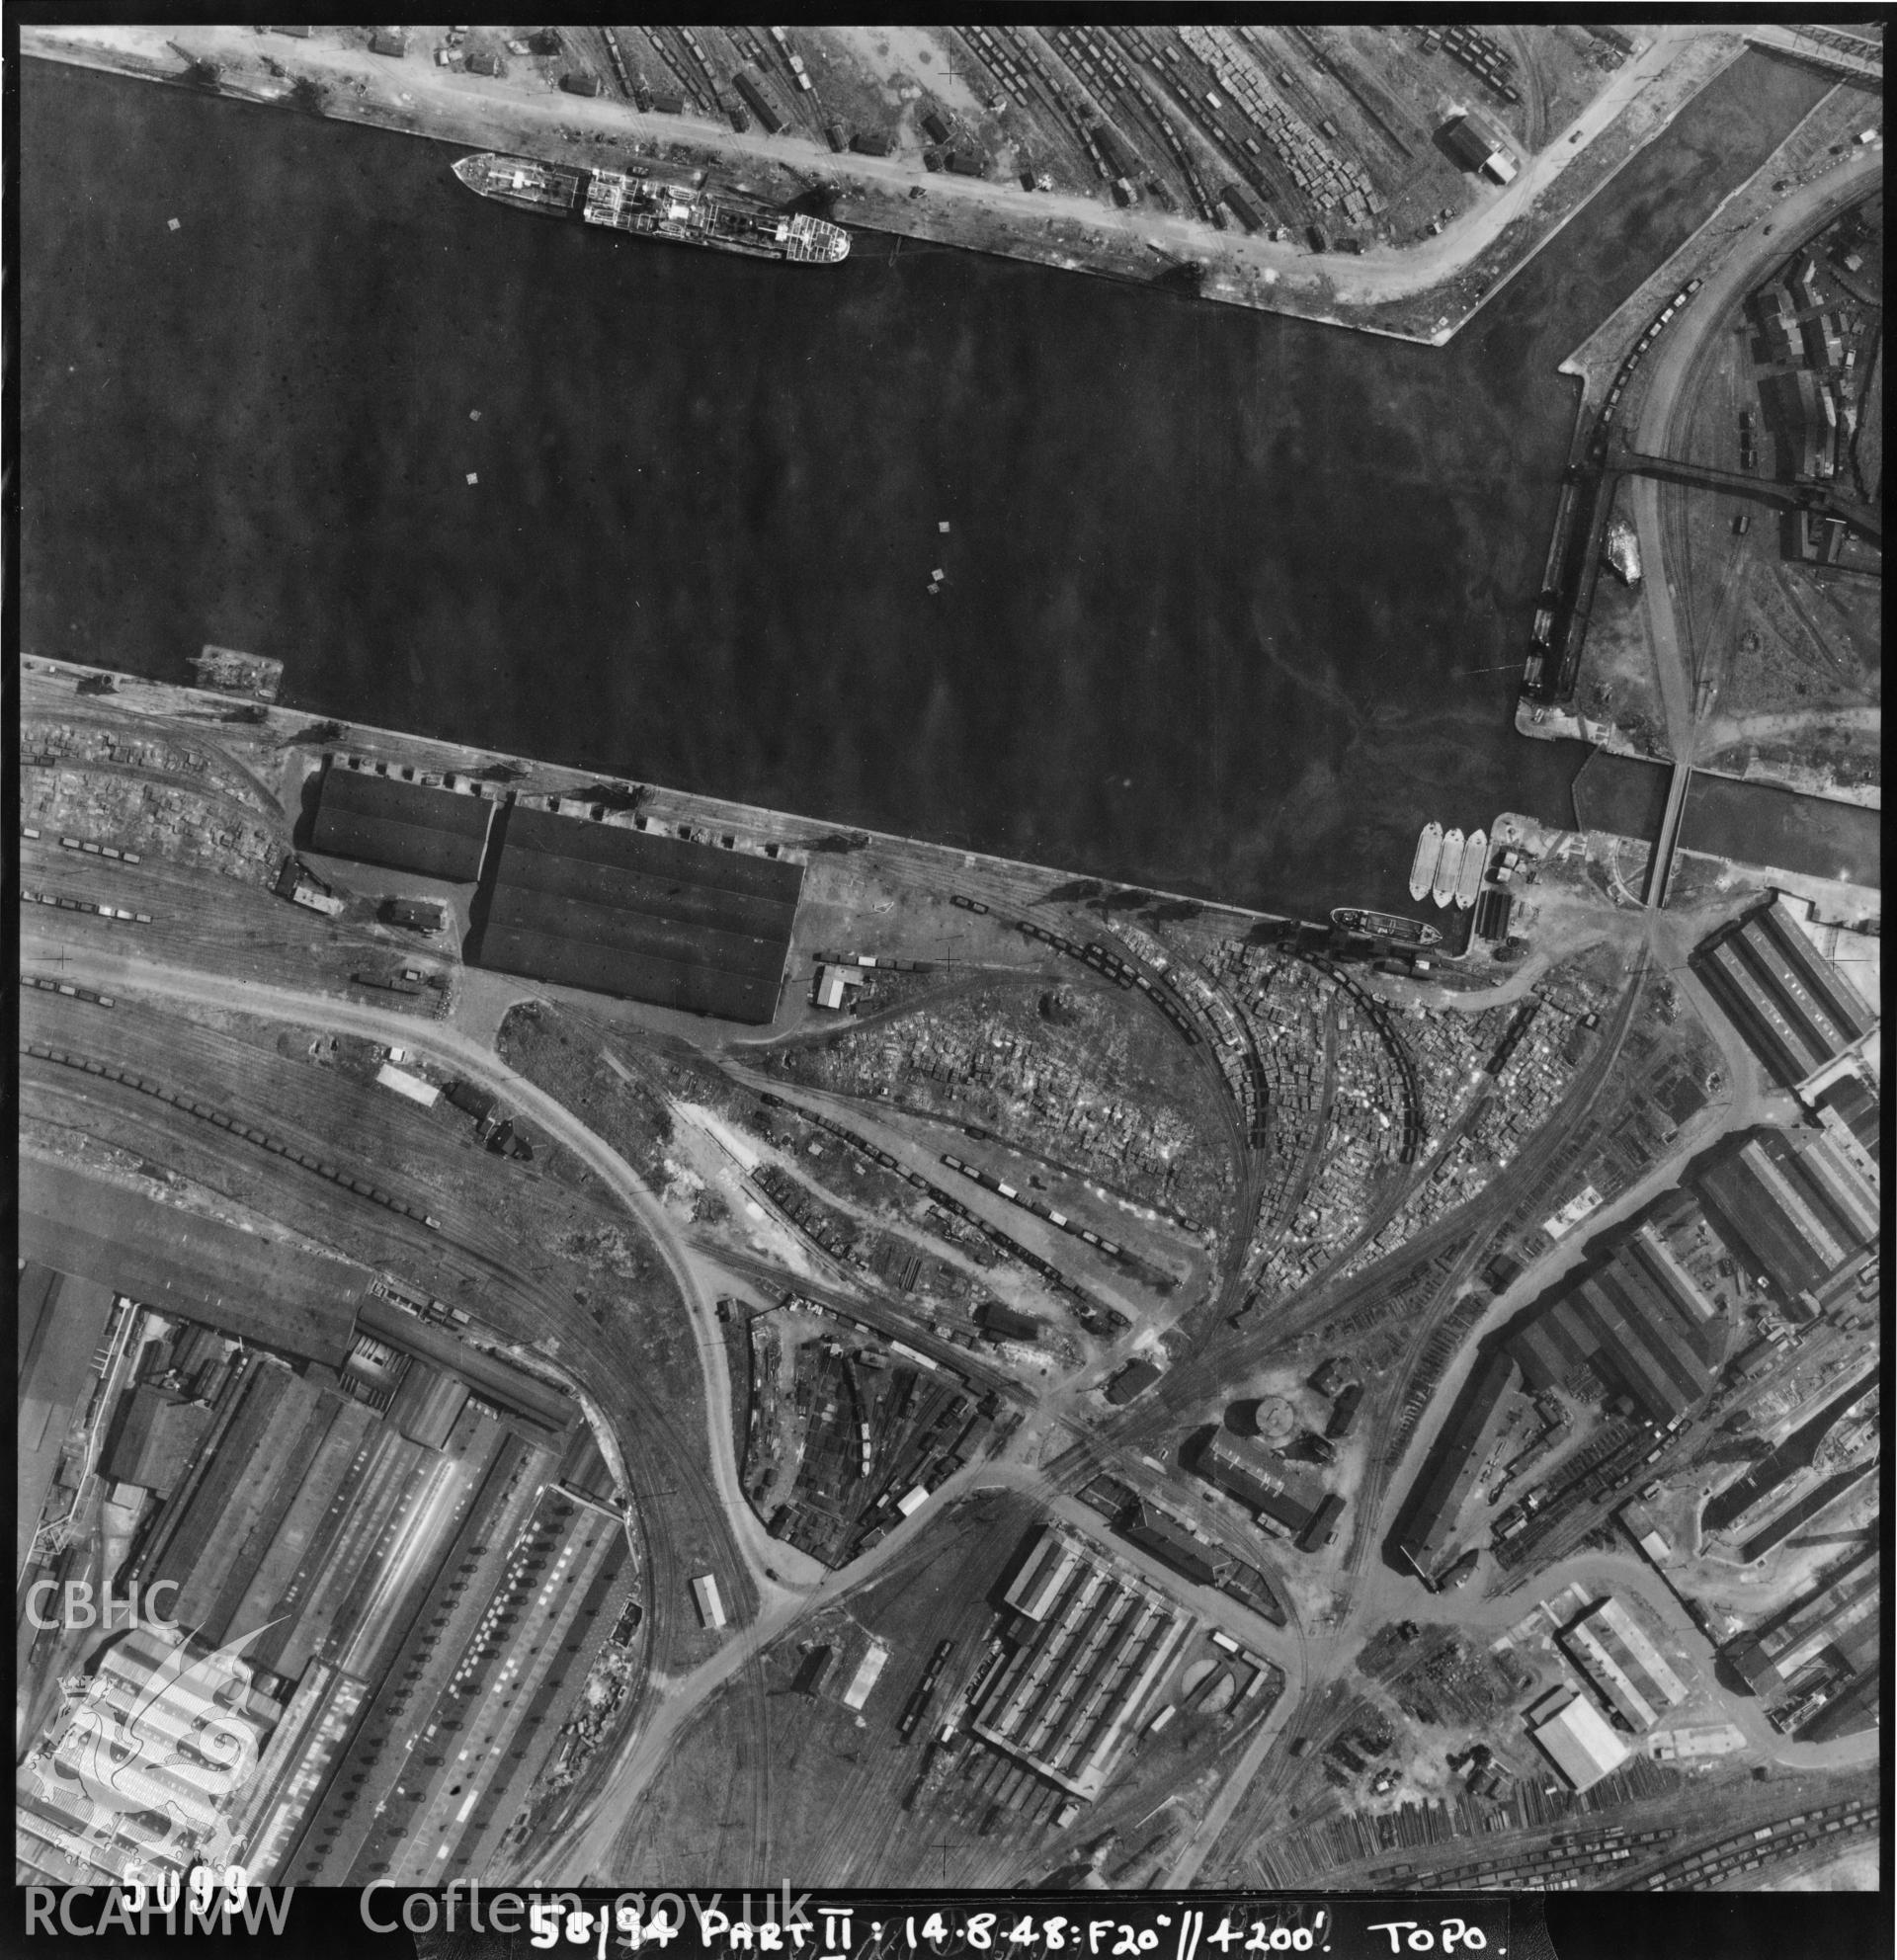 Black and white vertical aerial photograph taken by the RAF on 14/08/1948 showing Roath Dock area of Cardiff.